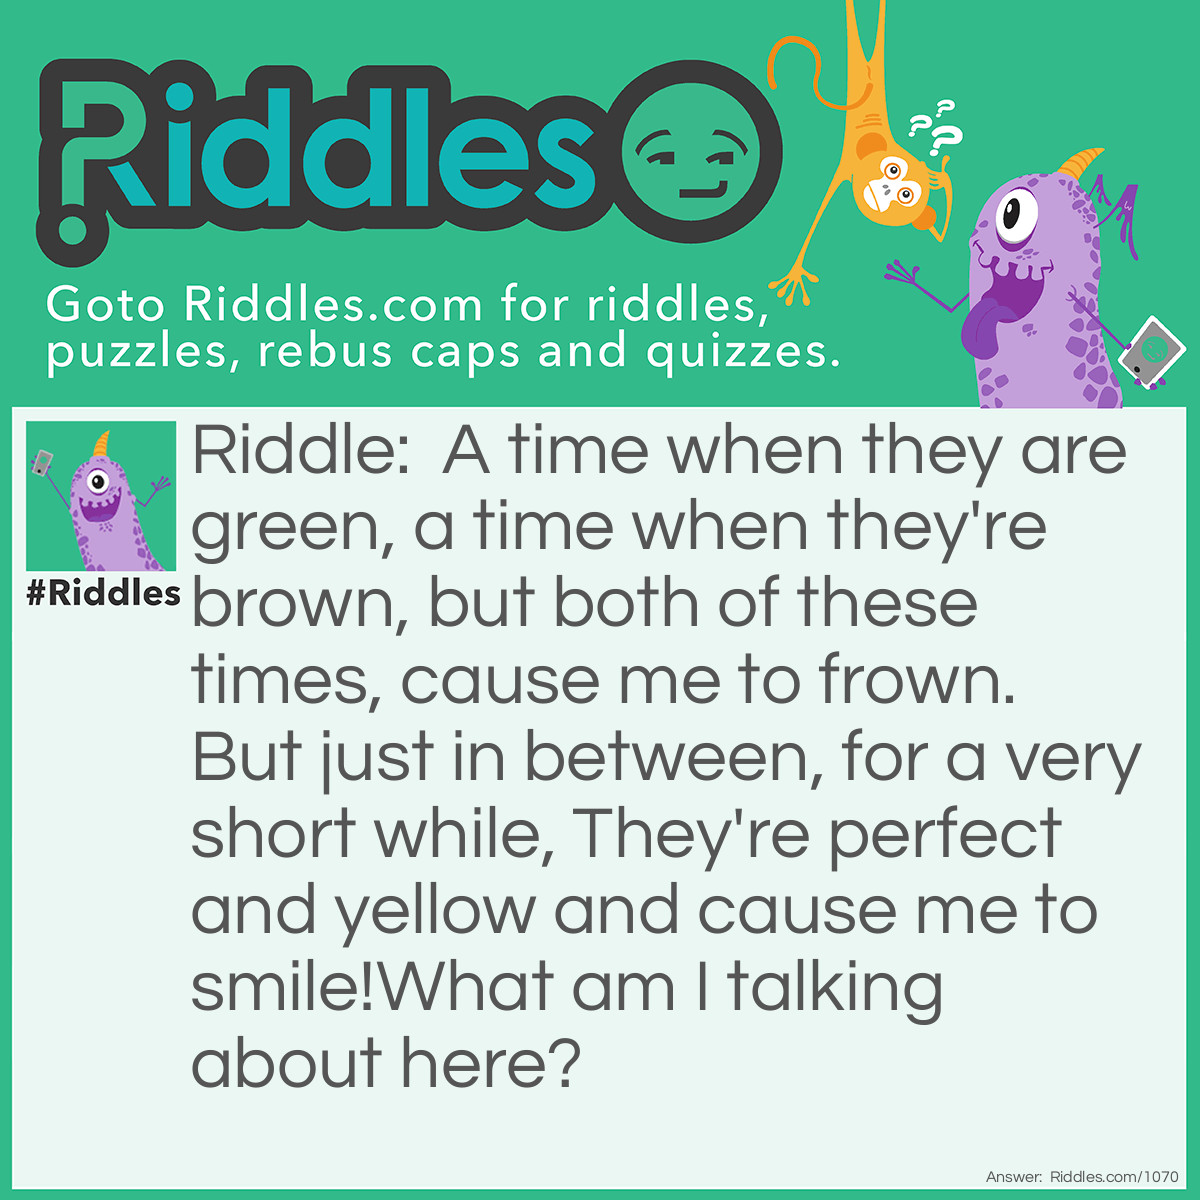 Riddle: A time when they are green, a time when they're brown, but both of these times, cause me to frown. But just in between, for a very <a href="https://www.riddles.com/short-riddles">short</a> while, They're perfect and yellow and cause me to smile!
What am I talking about here? Answer: Bananas.